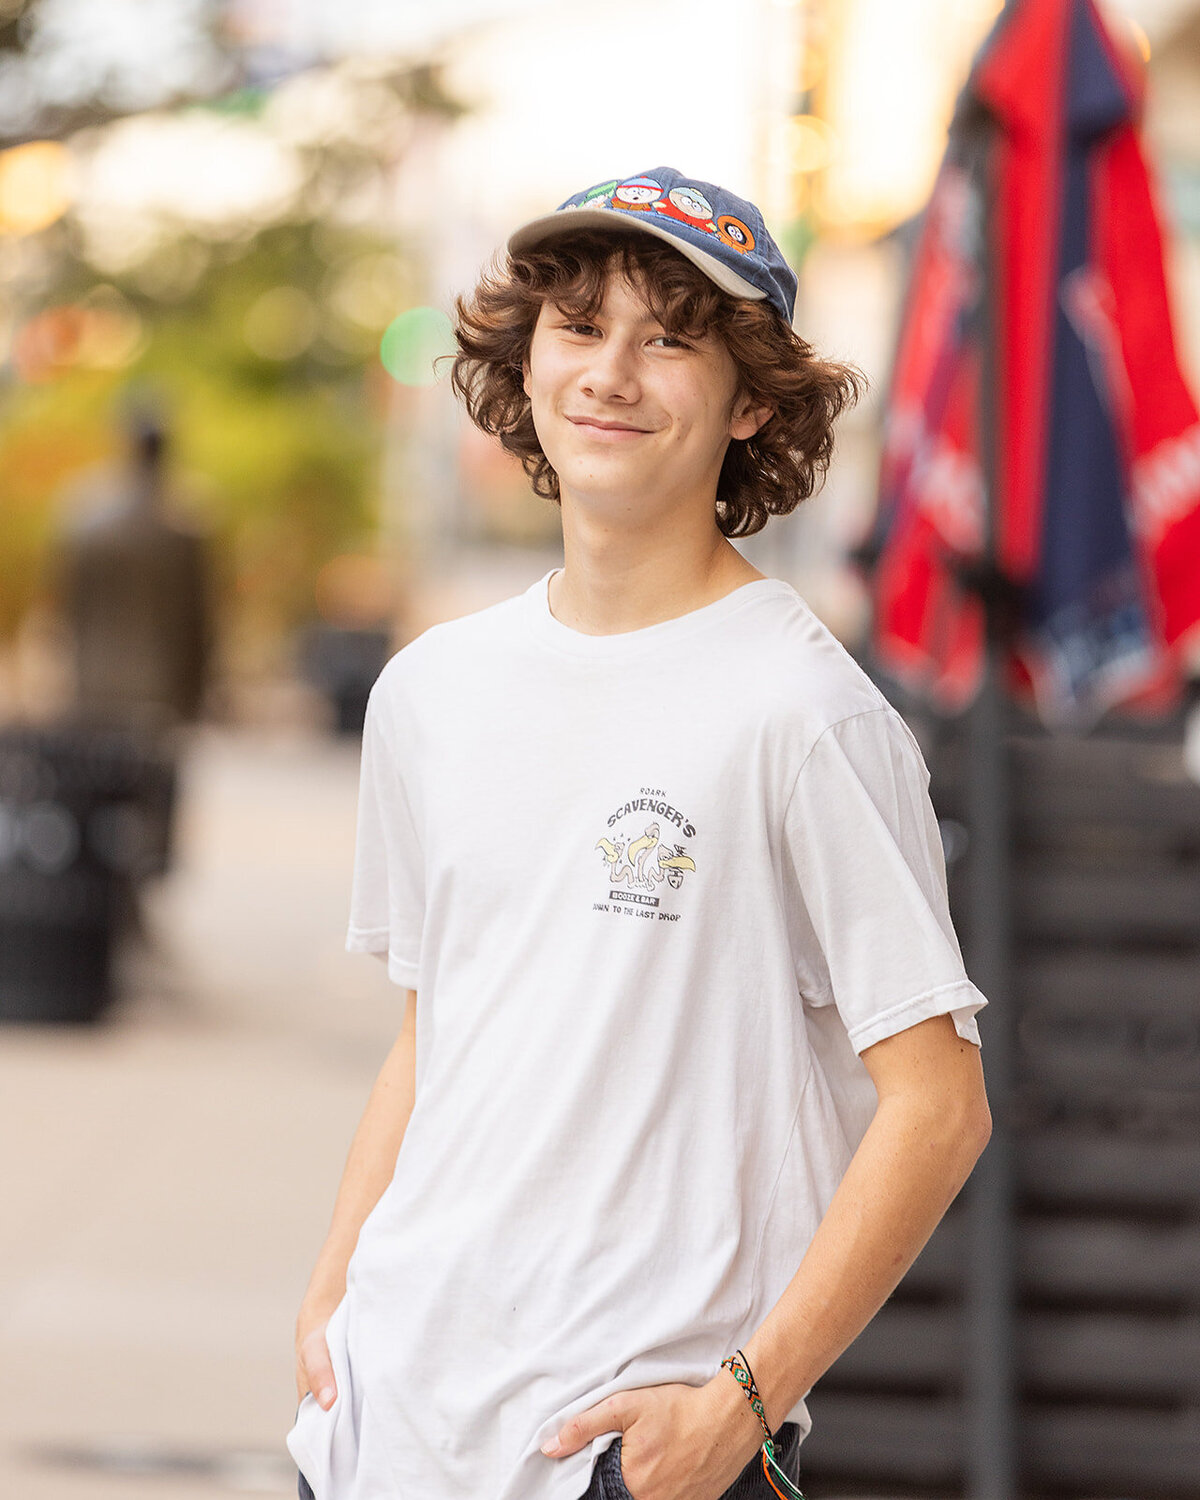 senior boy relaxed with hand in pocket downtown urban smiling